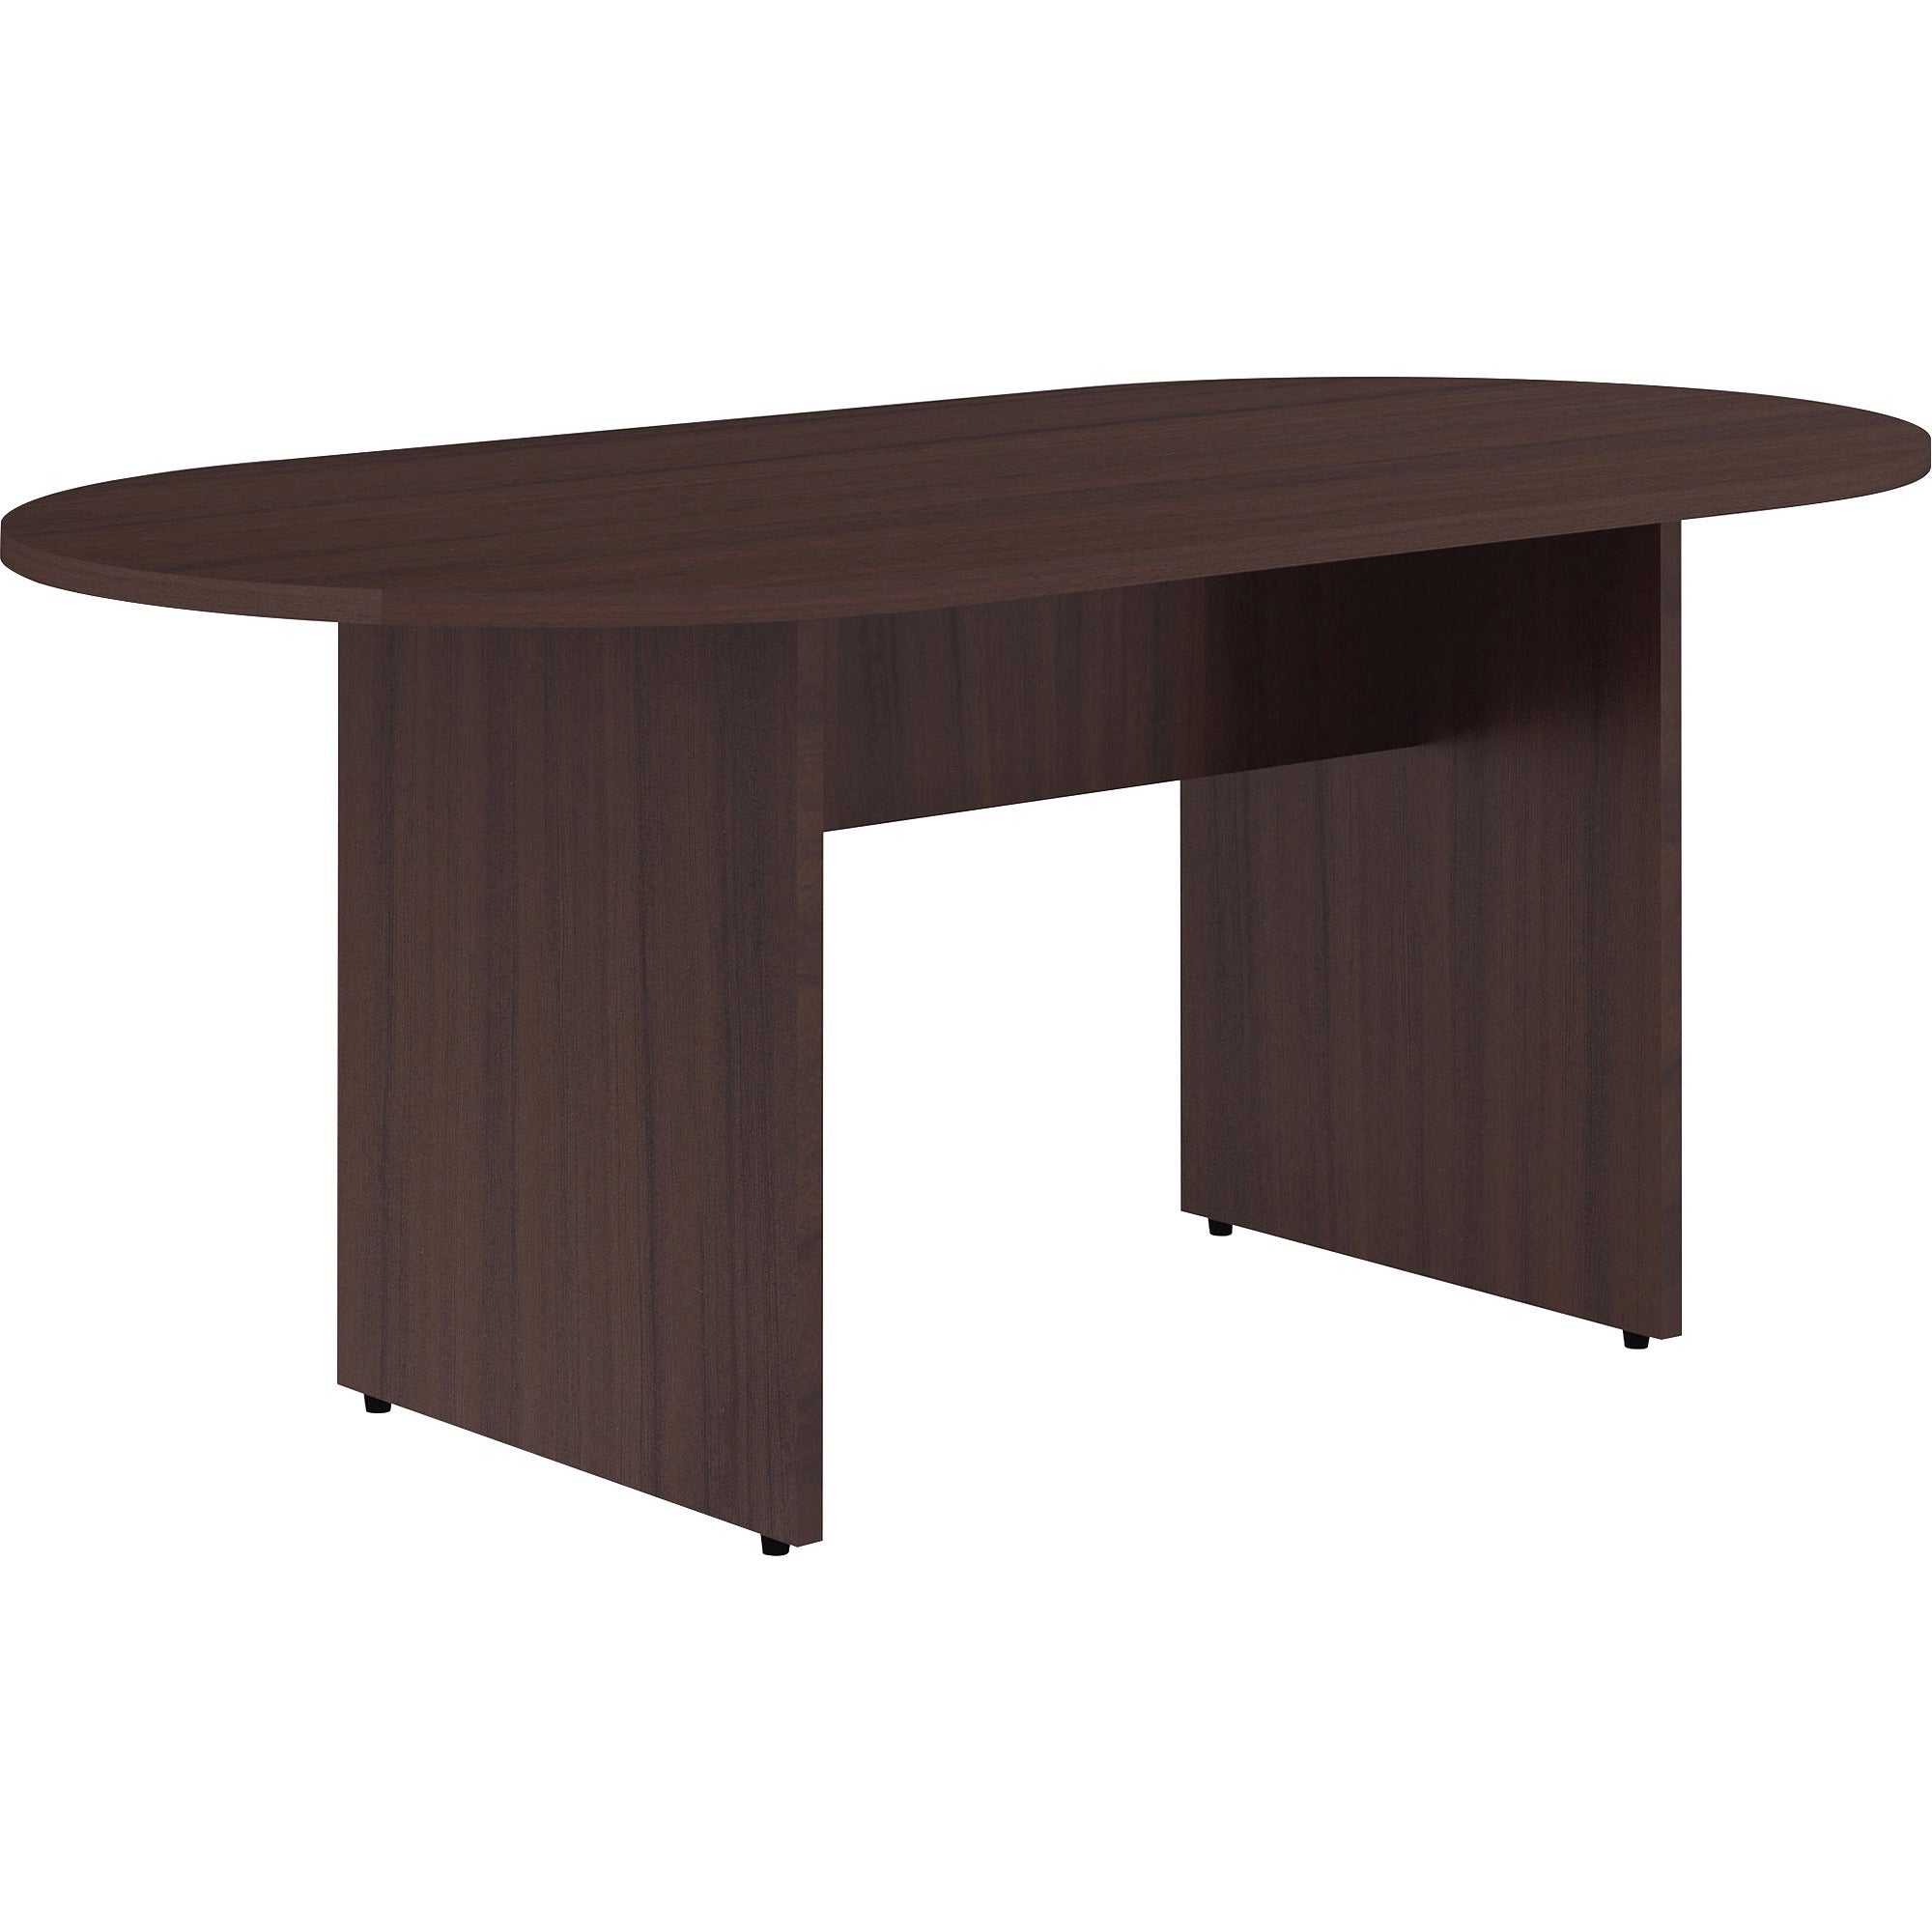 lorell-essentials-oval-conference-table-72-x-36-x-13-x-295_llr18230 - 1